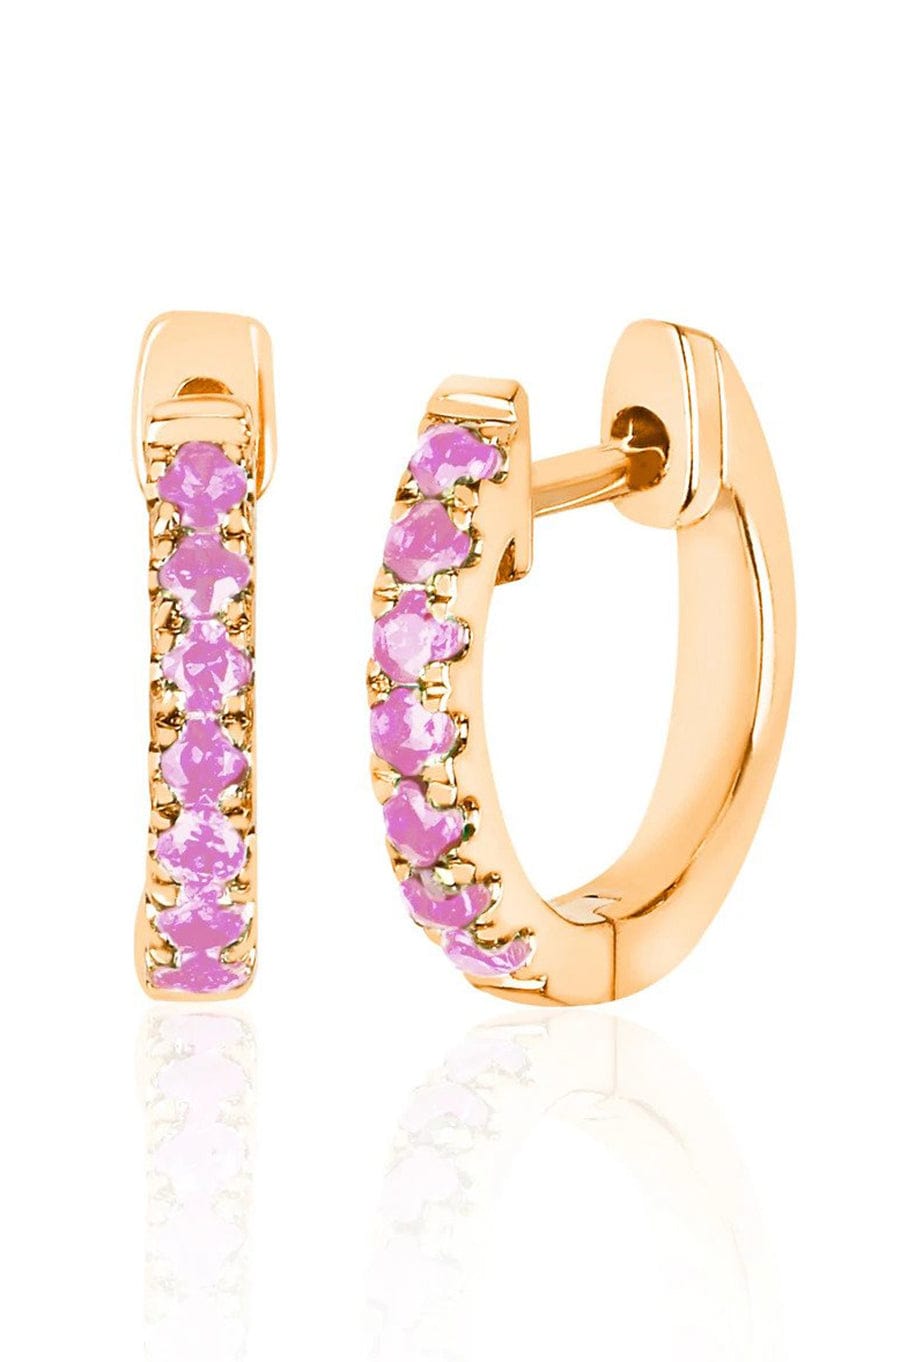 EF COLLECTION-Pink Sapphire Mini Huggies-YELLOW GOLD